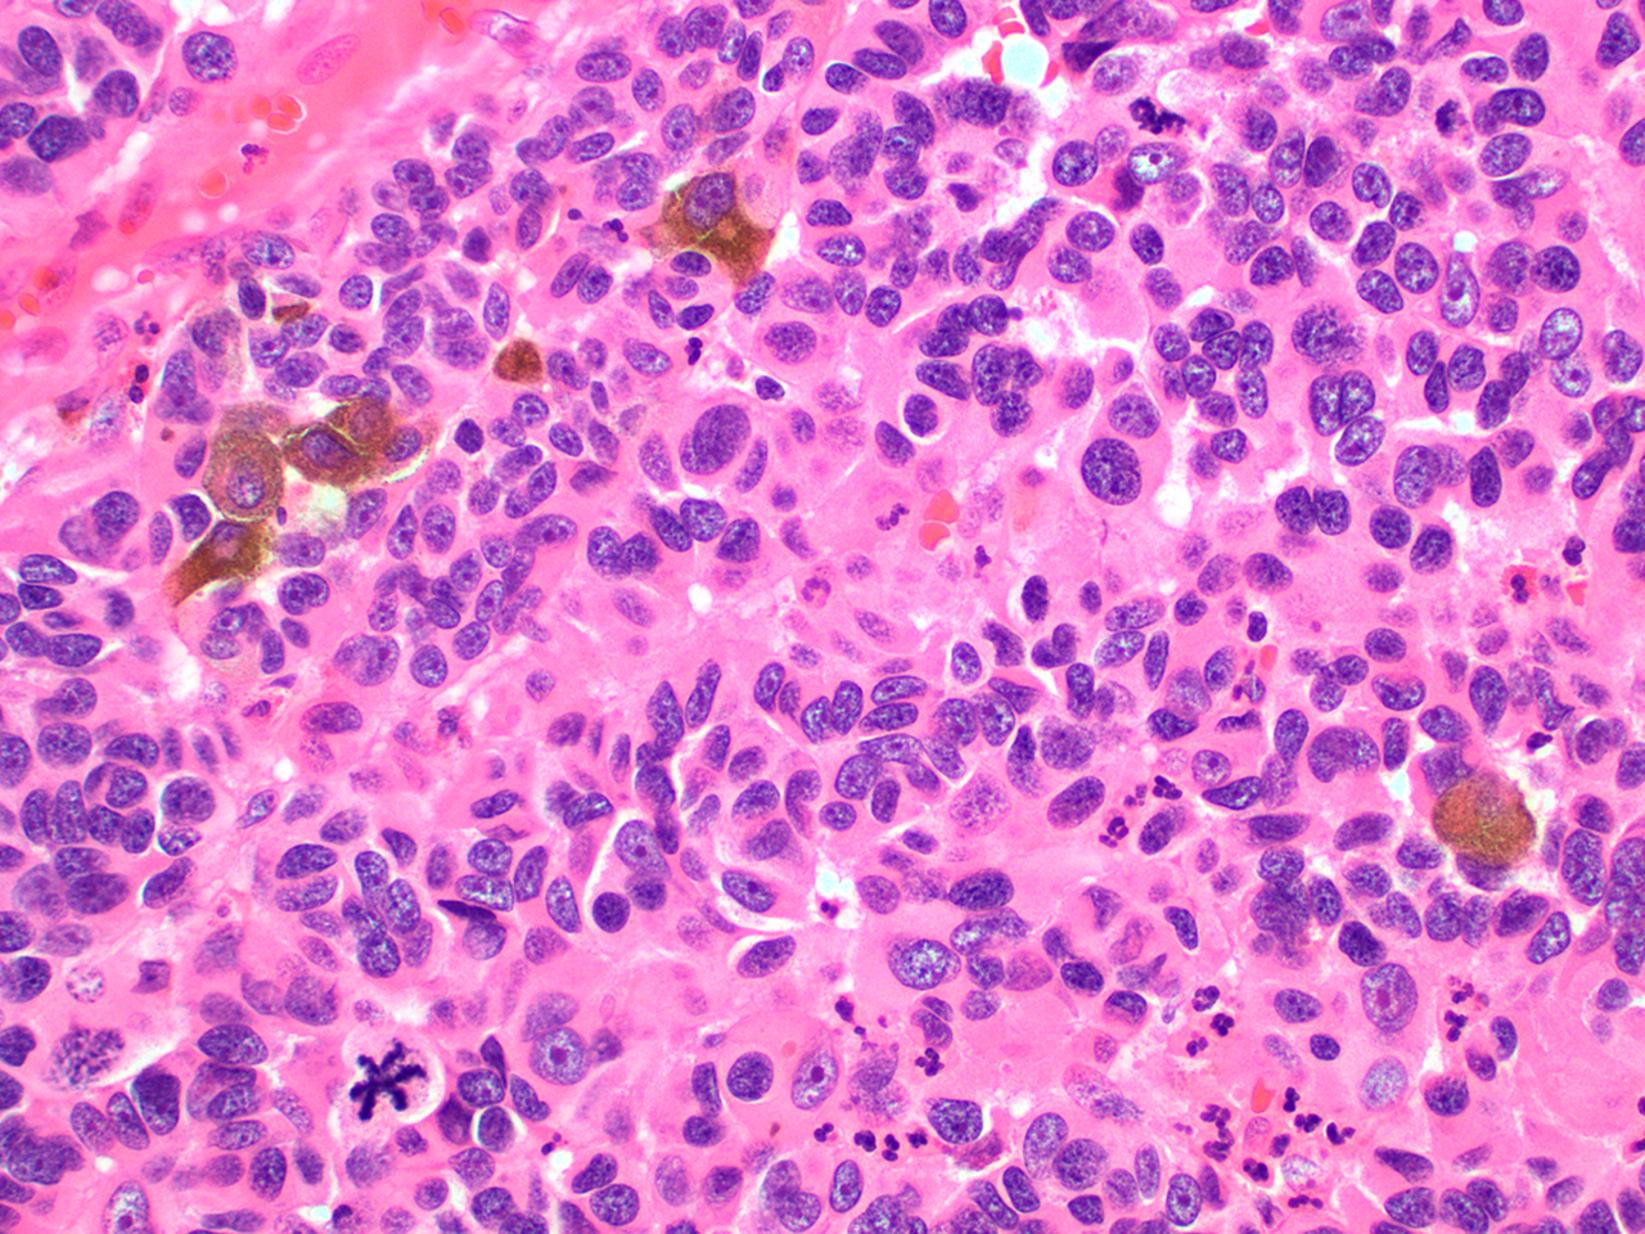 Fig. 17.7, Invasive melanoma with epithelioid cytology, patchy cytoplasmic pigmentation and atypical mitotic figure with multipolar spindle (left lower).